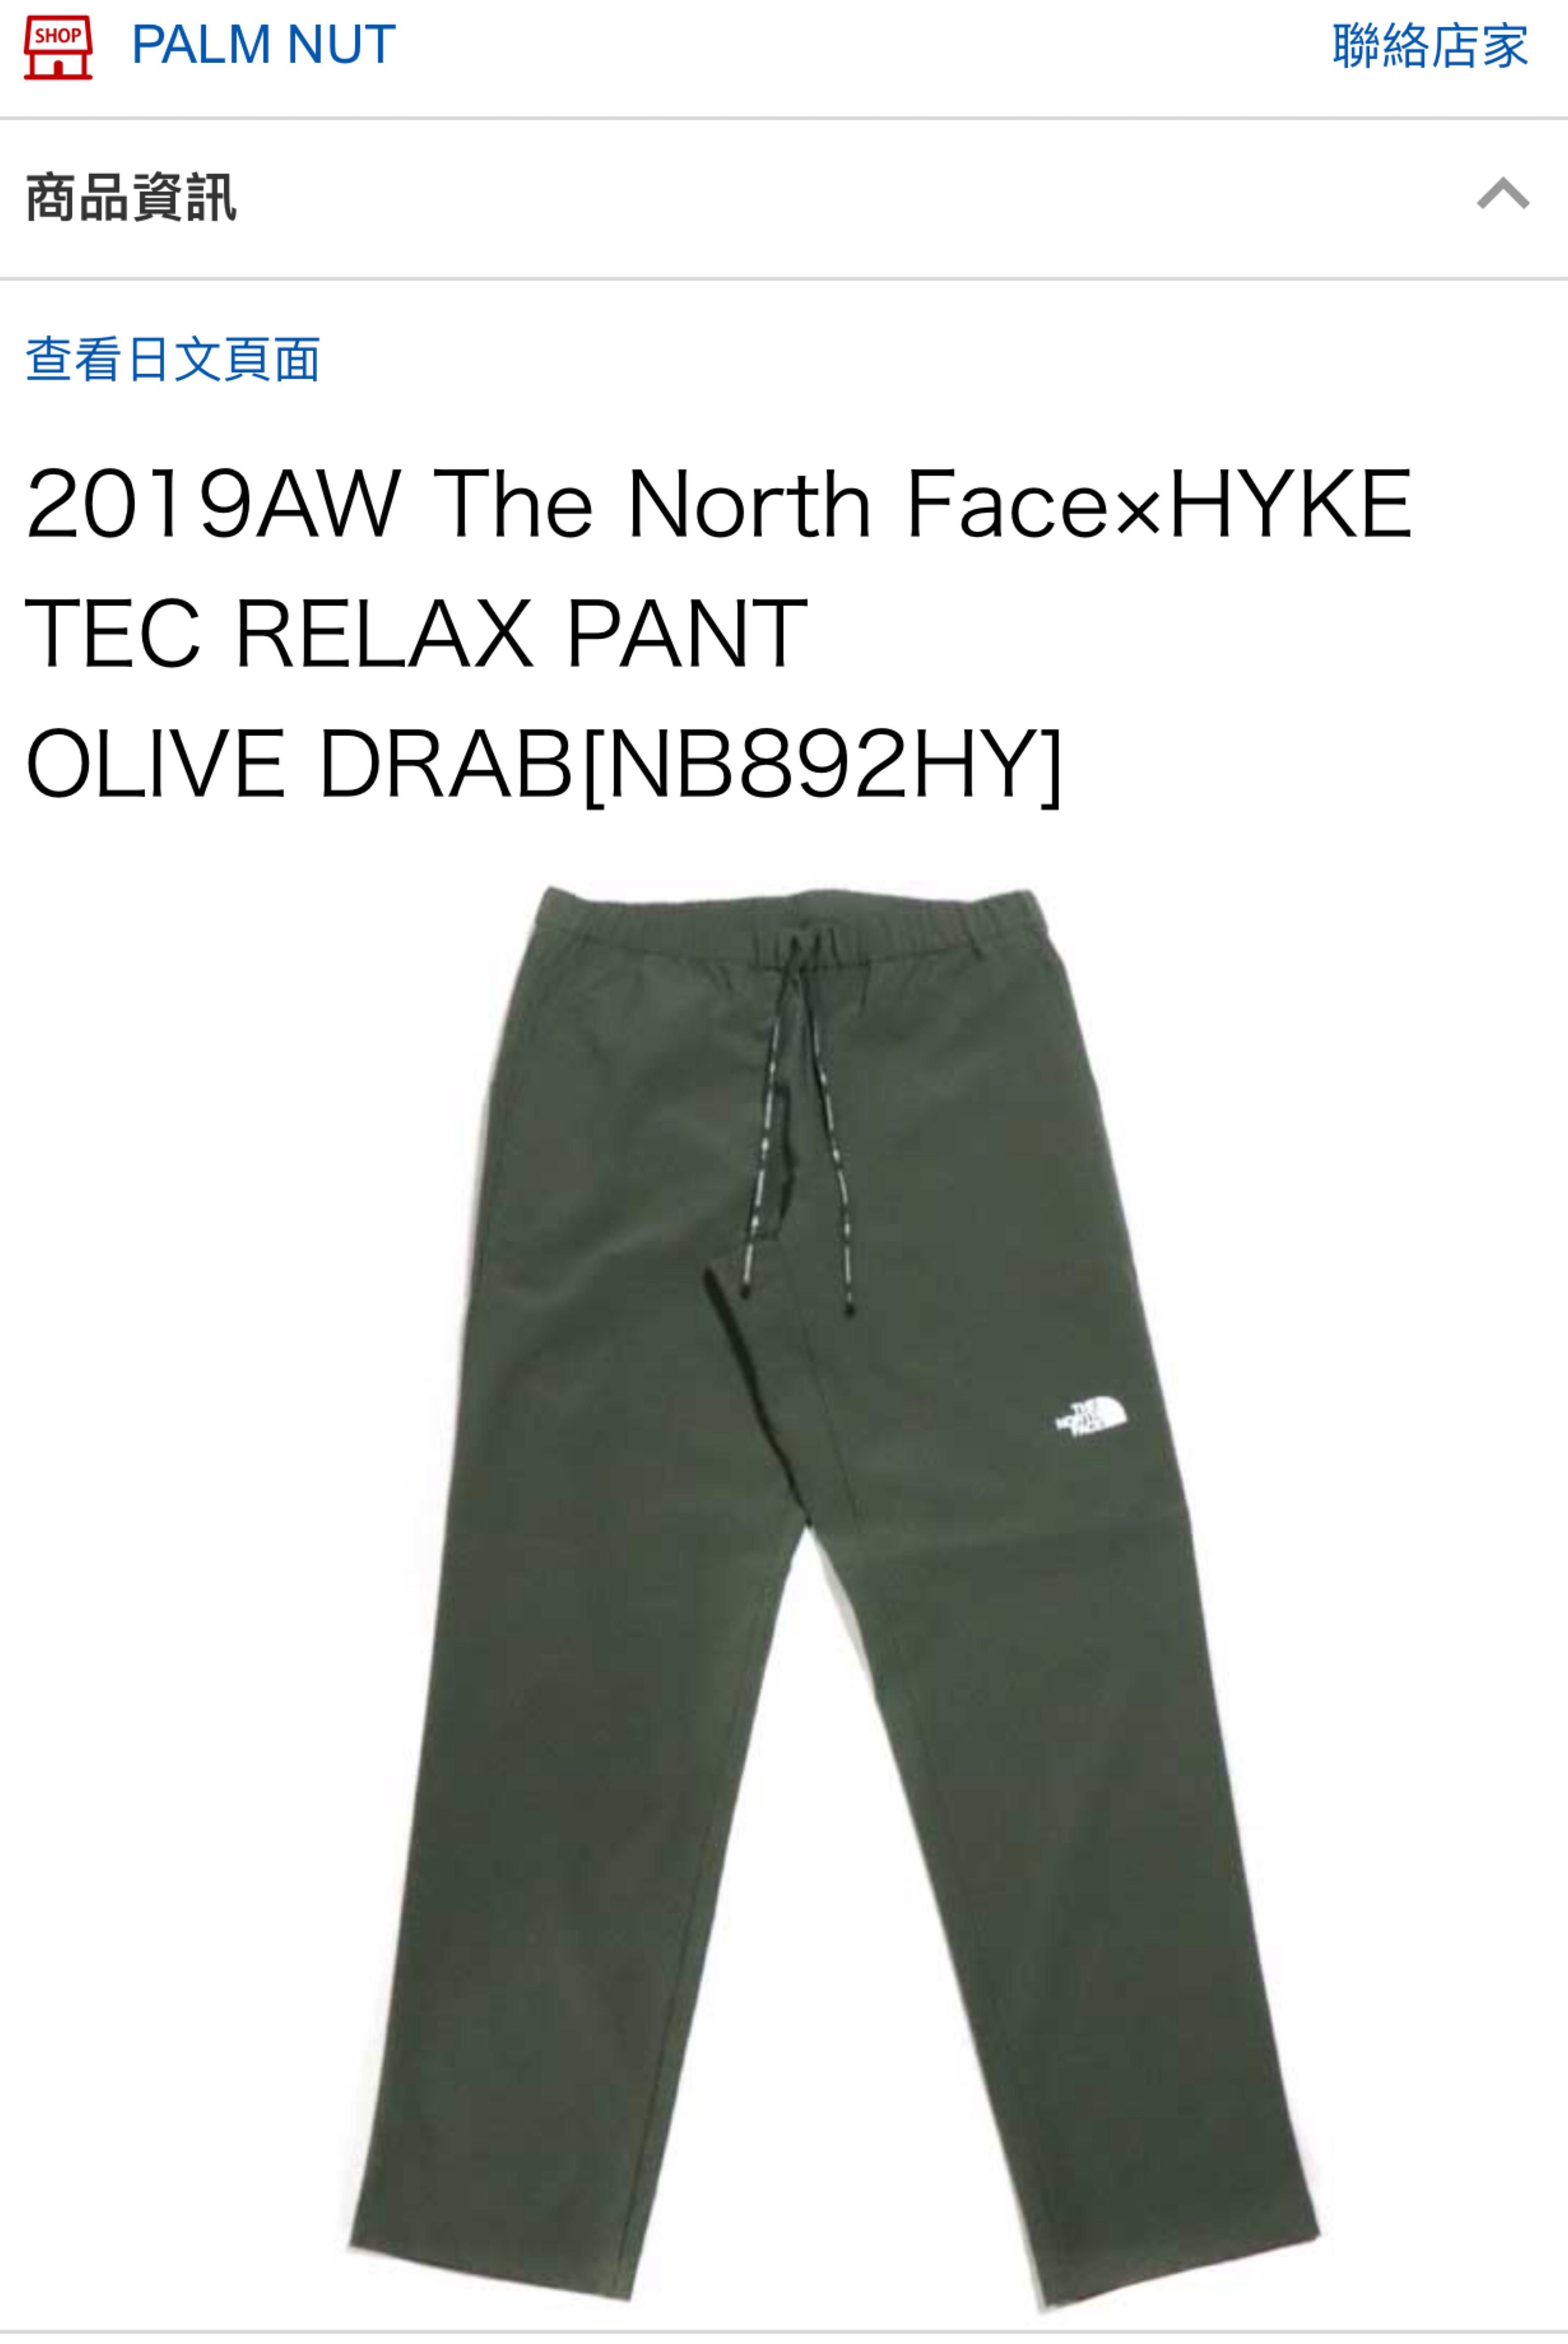 THE NORTH FACE hyke Tec Relax Pant